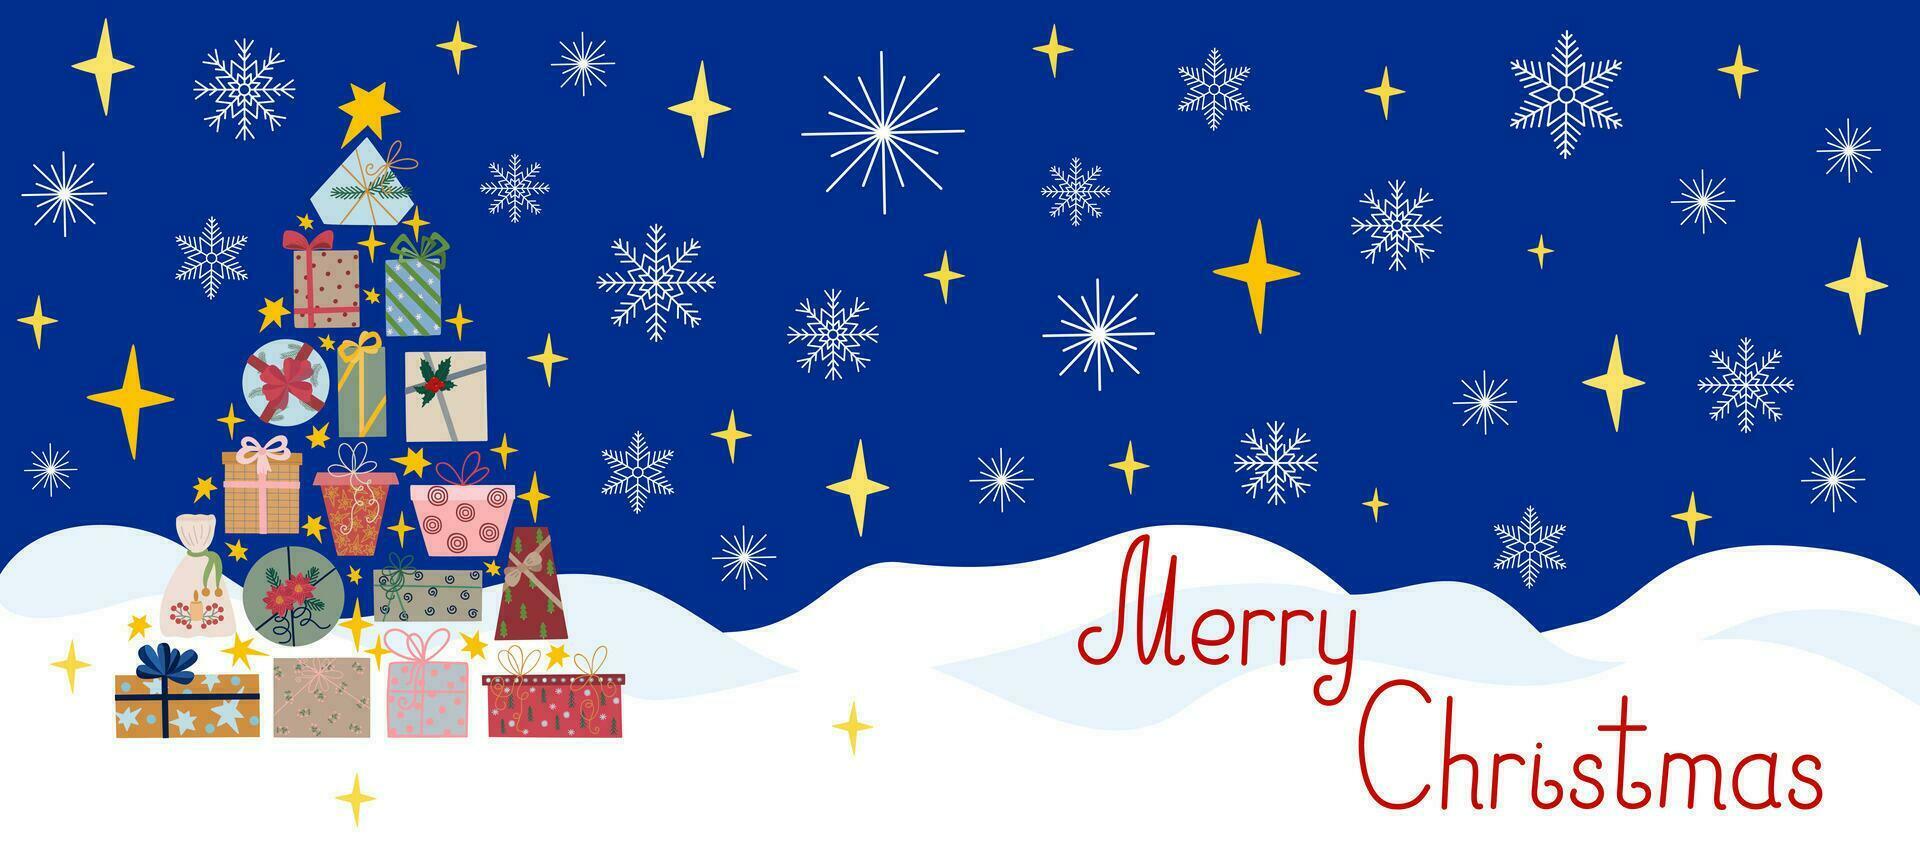 Merry Christmas holiday celebration template for greeting card, poster, banner, invitation, tree of gifts, night sky, stars, snowflakes on a snowy winter night landscape, season's greeting vector